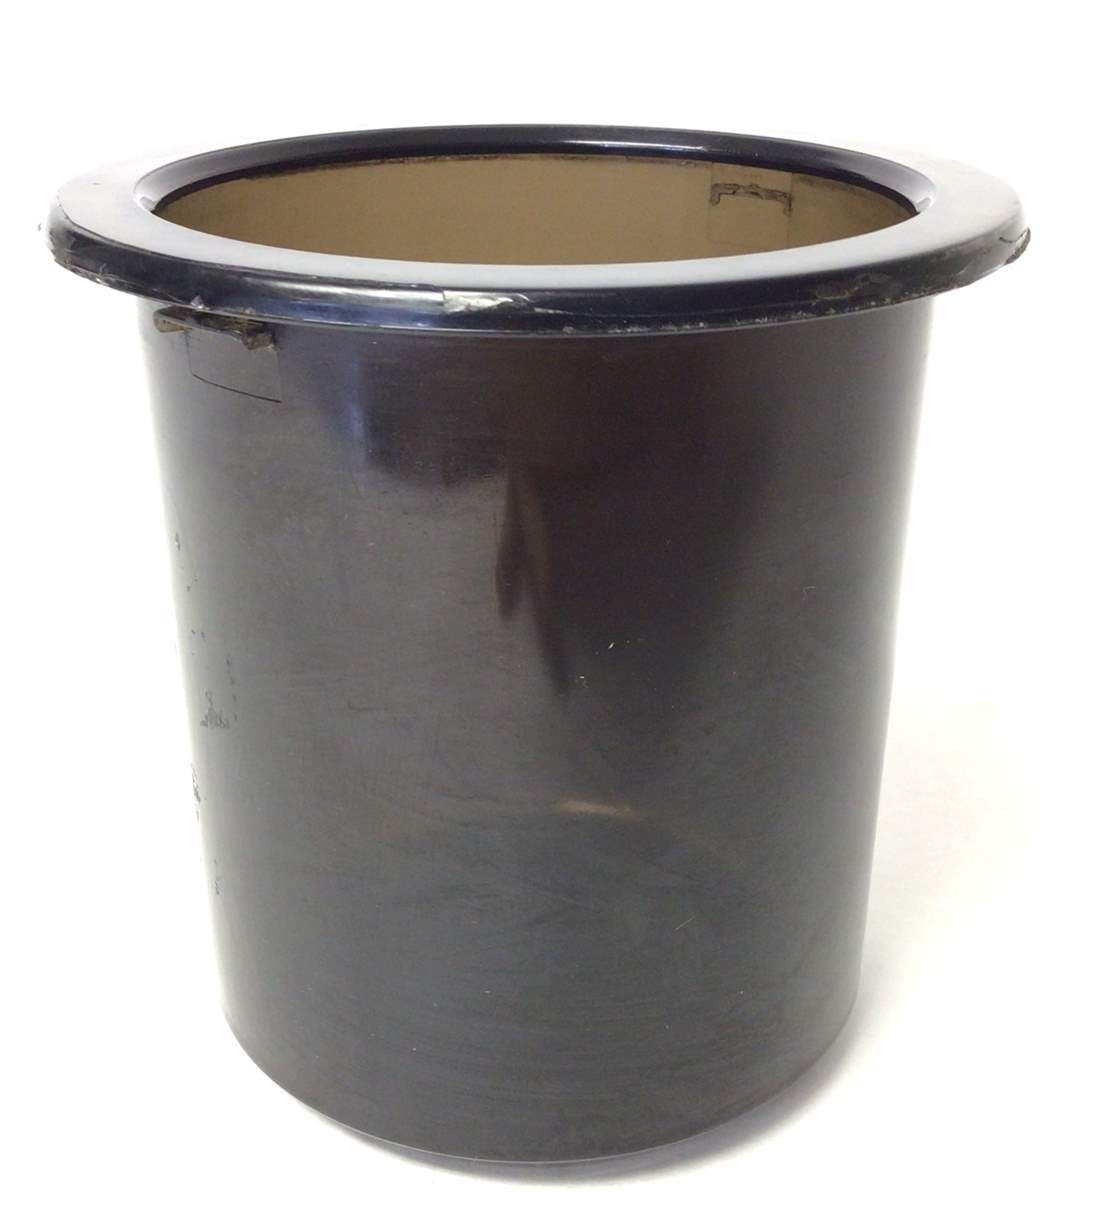 CUP (Used)